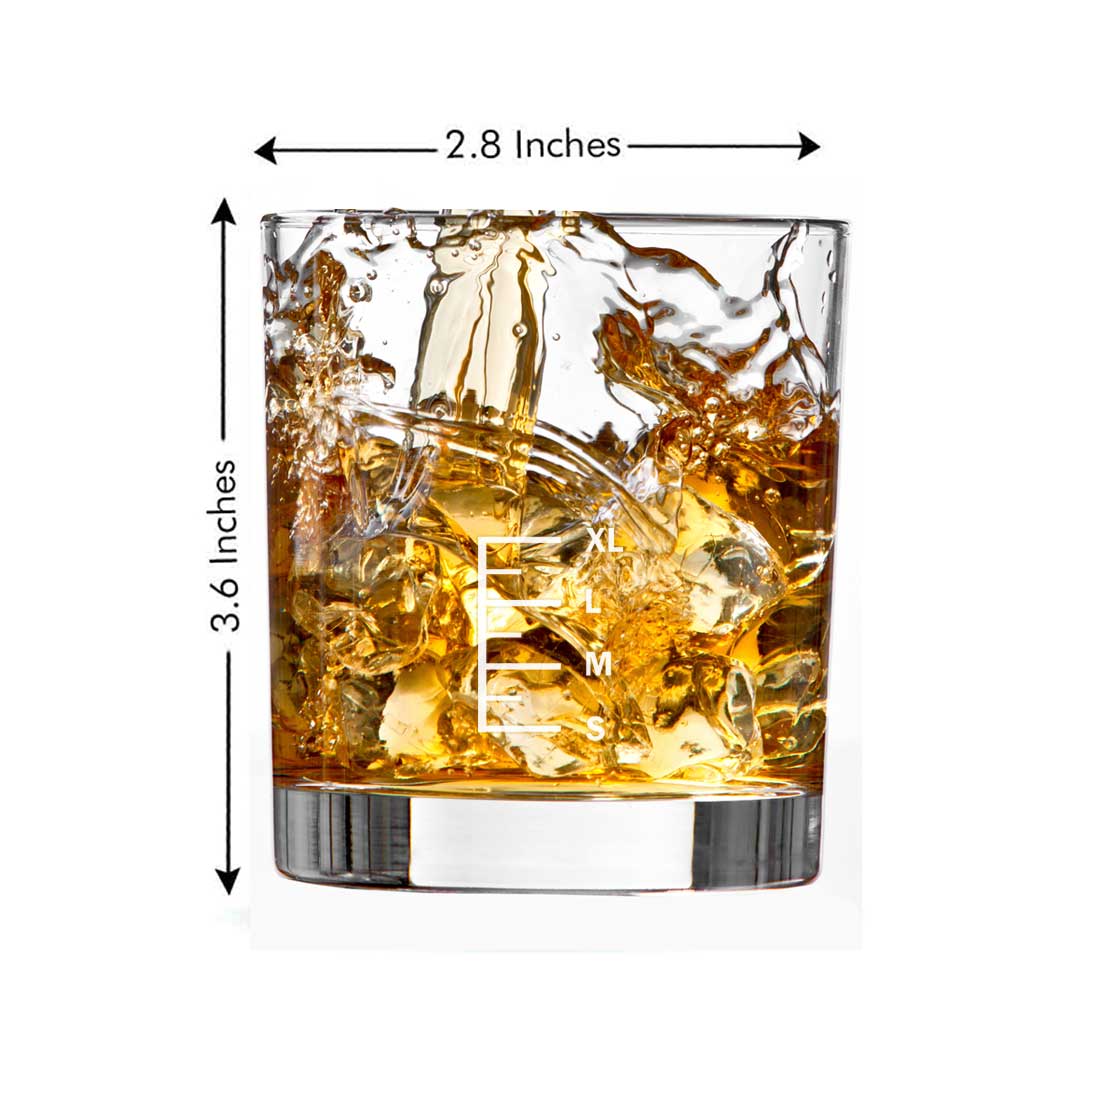 Whiskey Glasses Liquor Glass-  Anniversary Birthday Gift Funny Gifts for Husband Bf - S M L XL